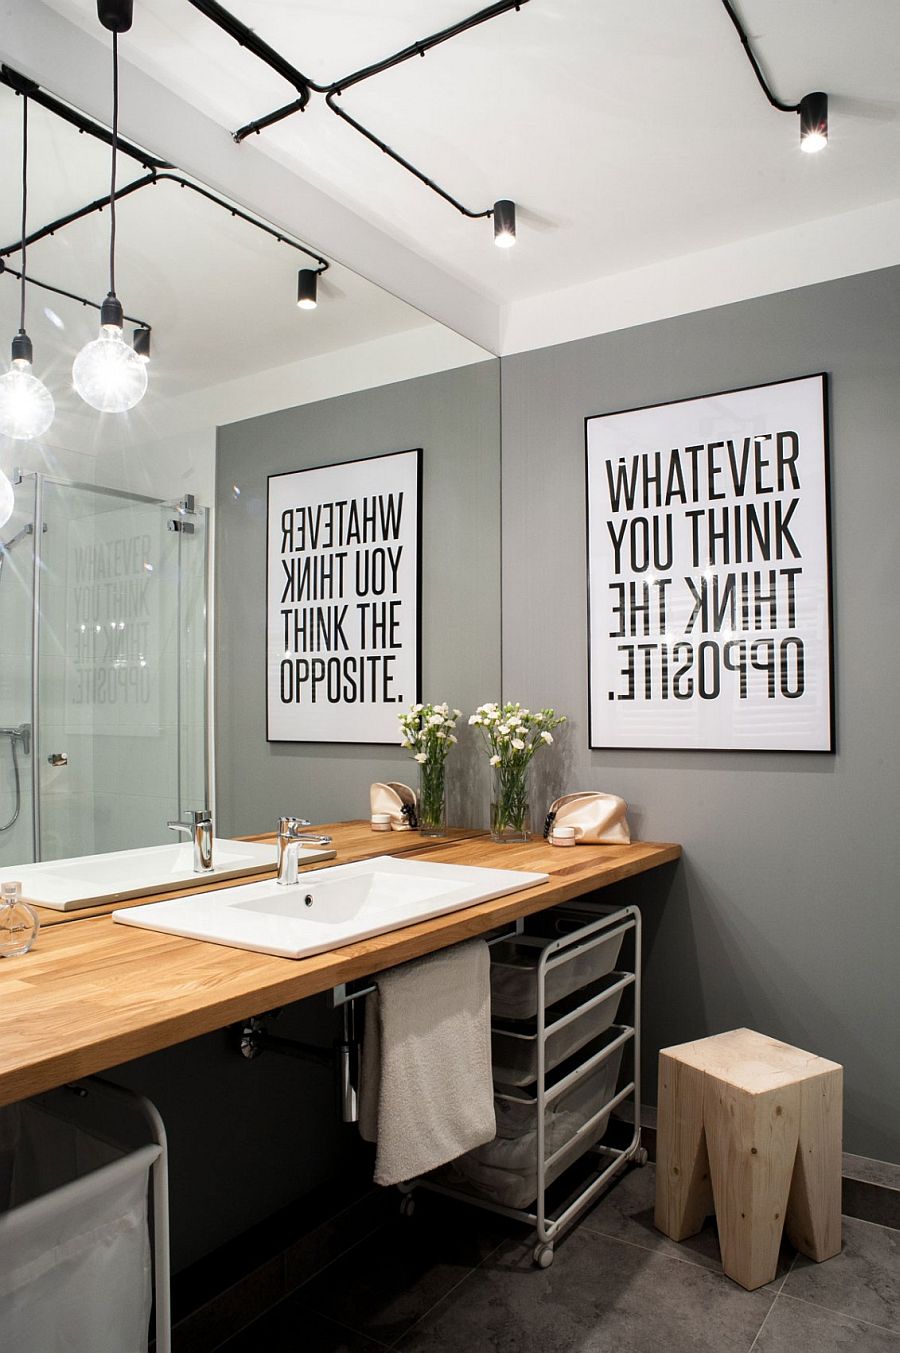 Lighting steals the show in this bathroom